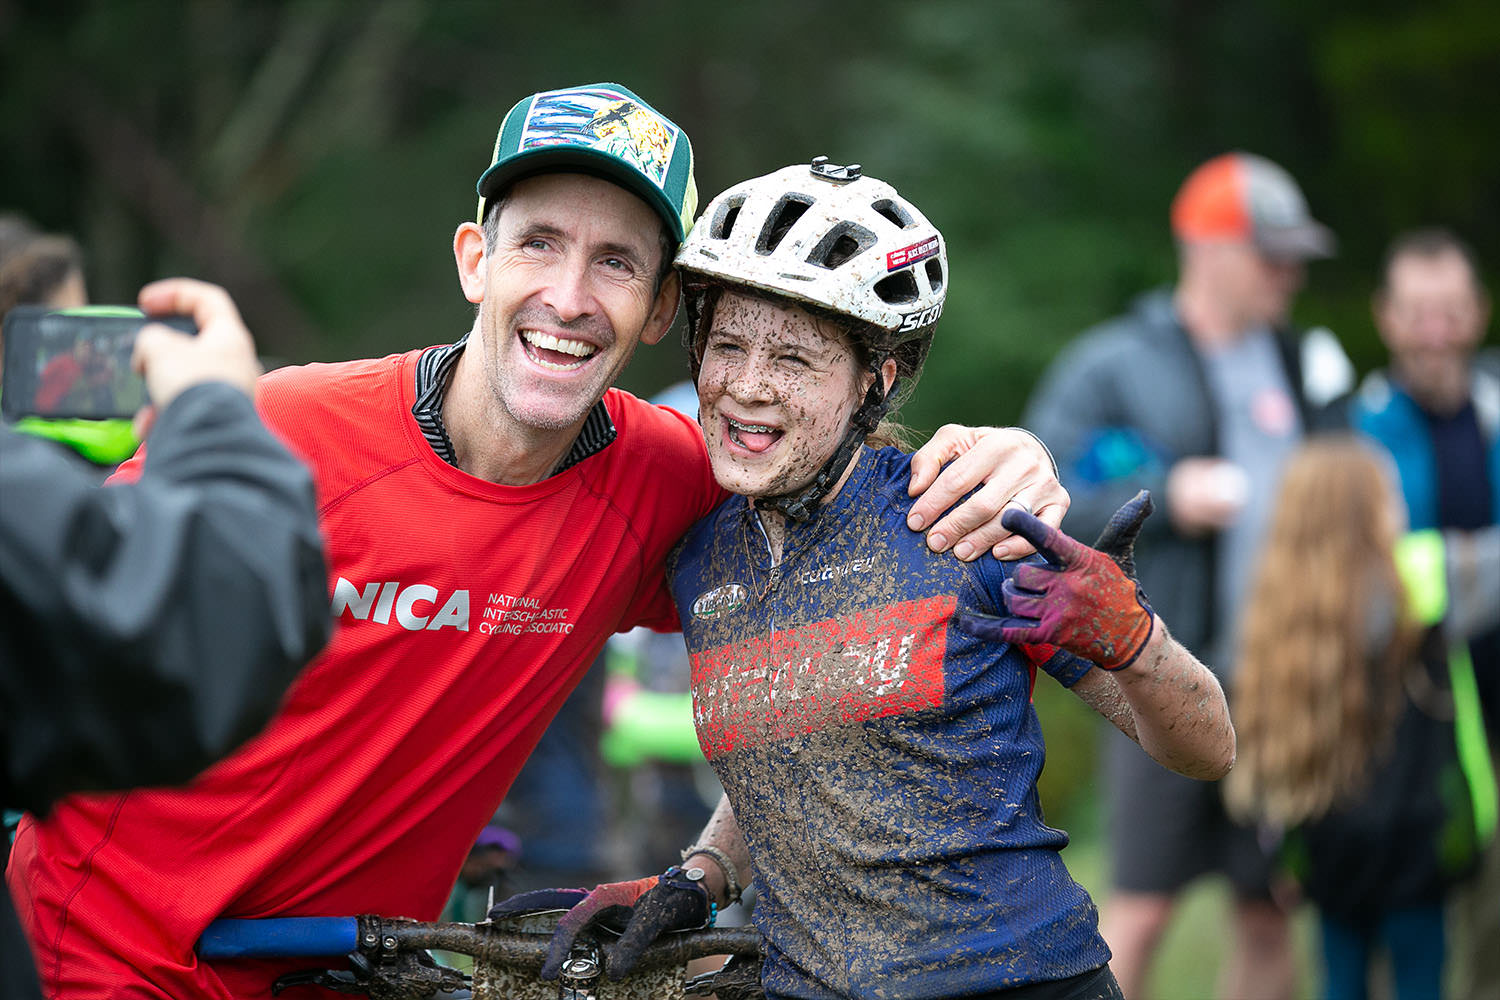 Become a mountain bike coach! Join current team or start a new team.